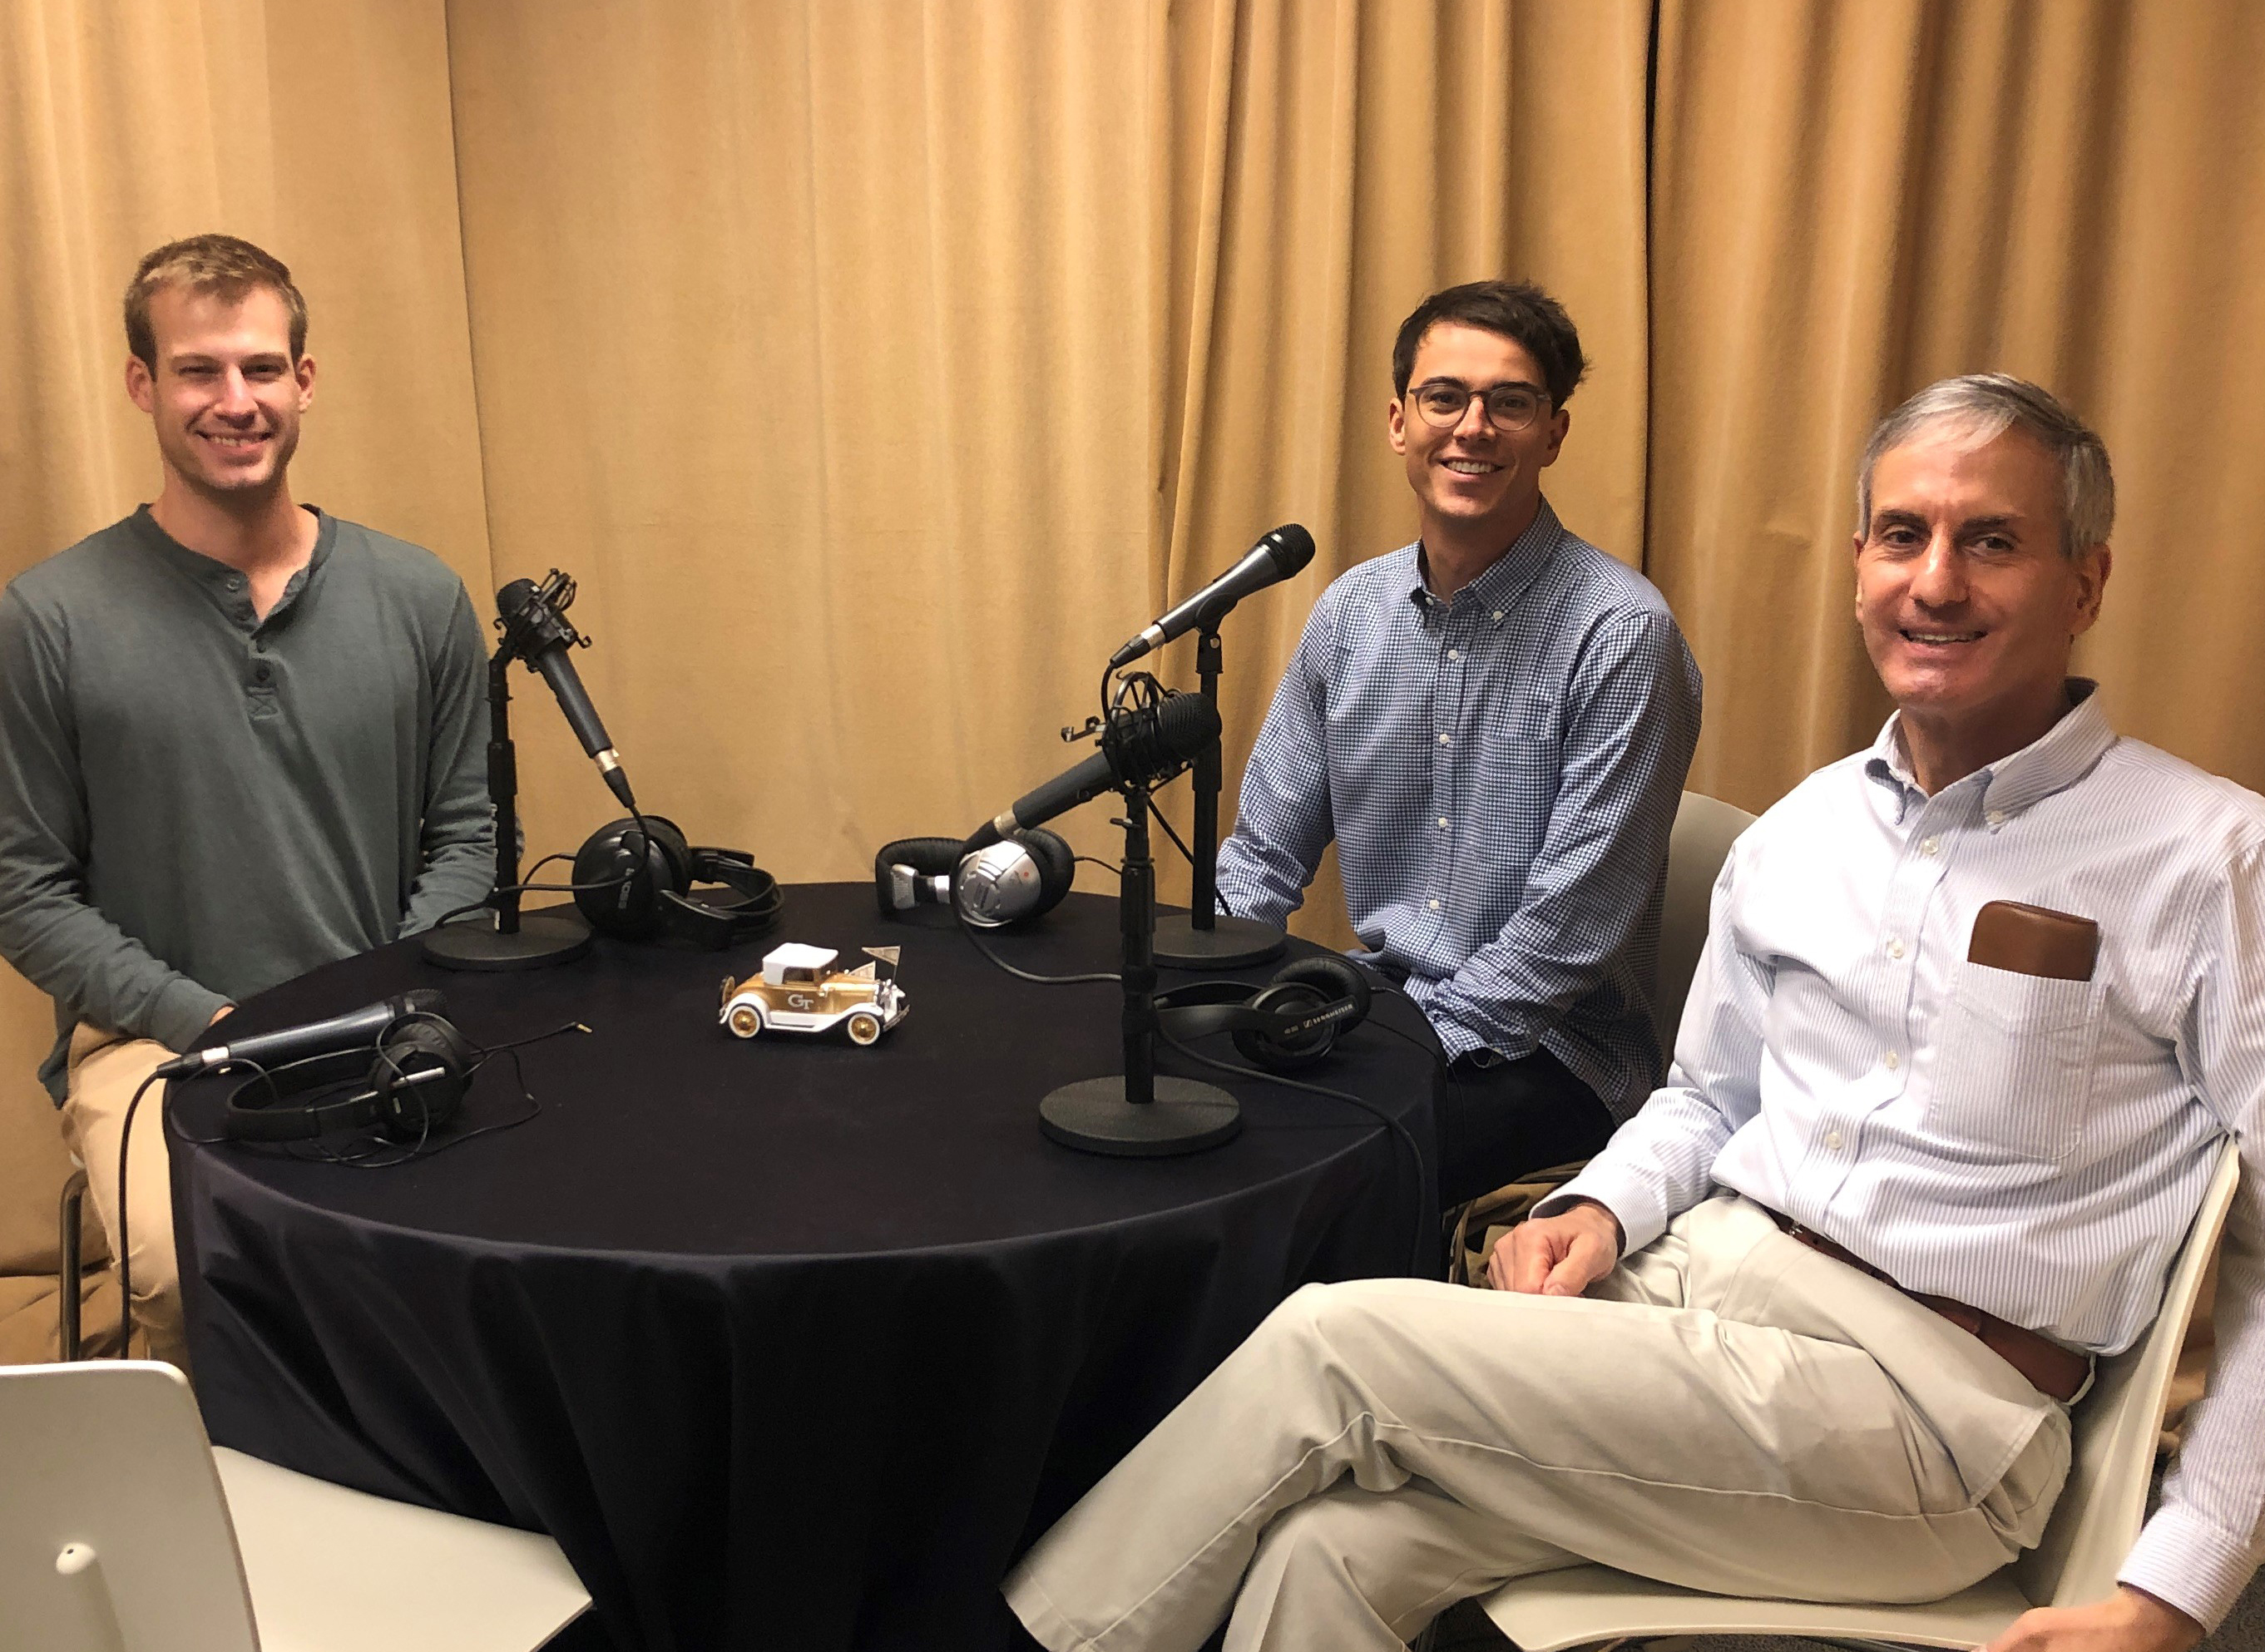 MBA student host Leo Haigh speaks with Jonathan Giuliano and Kyle Winkler.